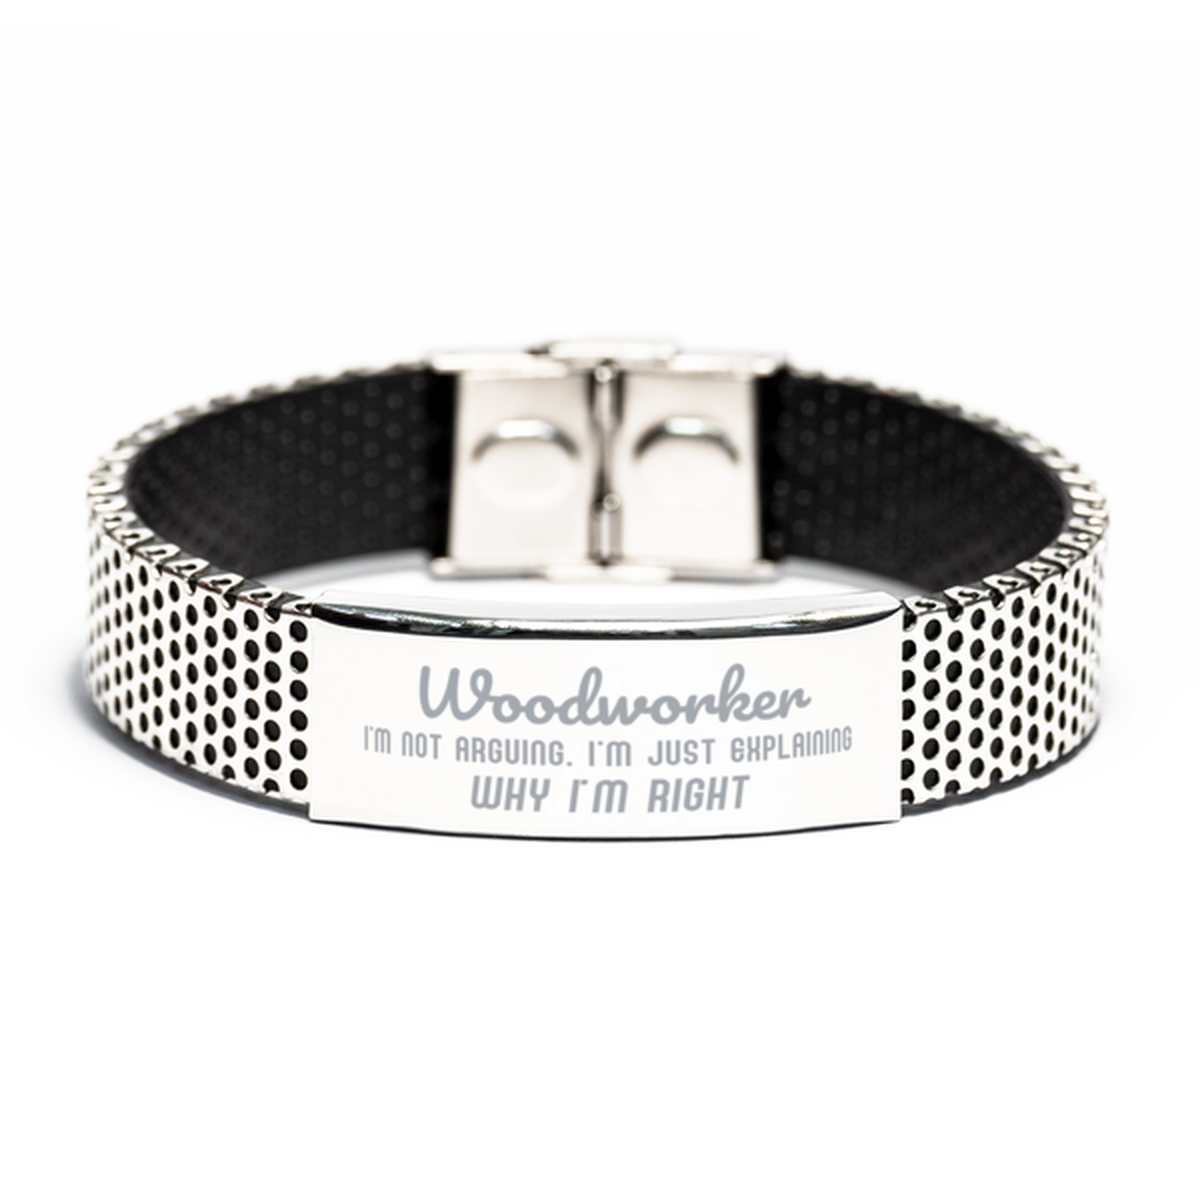 Woodworker I'm not Arguing. I'm Just Explaining Why I'm RIGHT Stainless Steel Bracelet, Funny Saying Quote Woodworker Gifts For Woodworker Graduation Birthday Christmas Gifts for Men Women Coworker